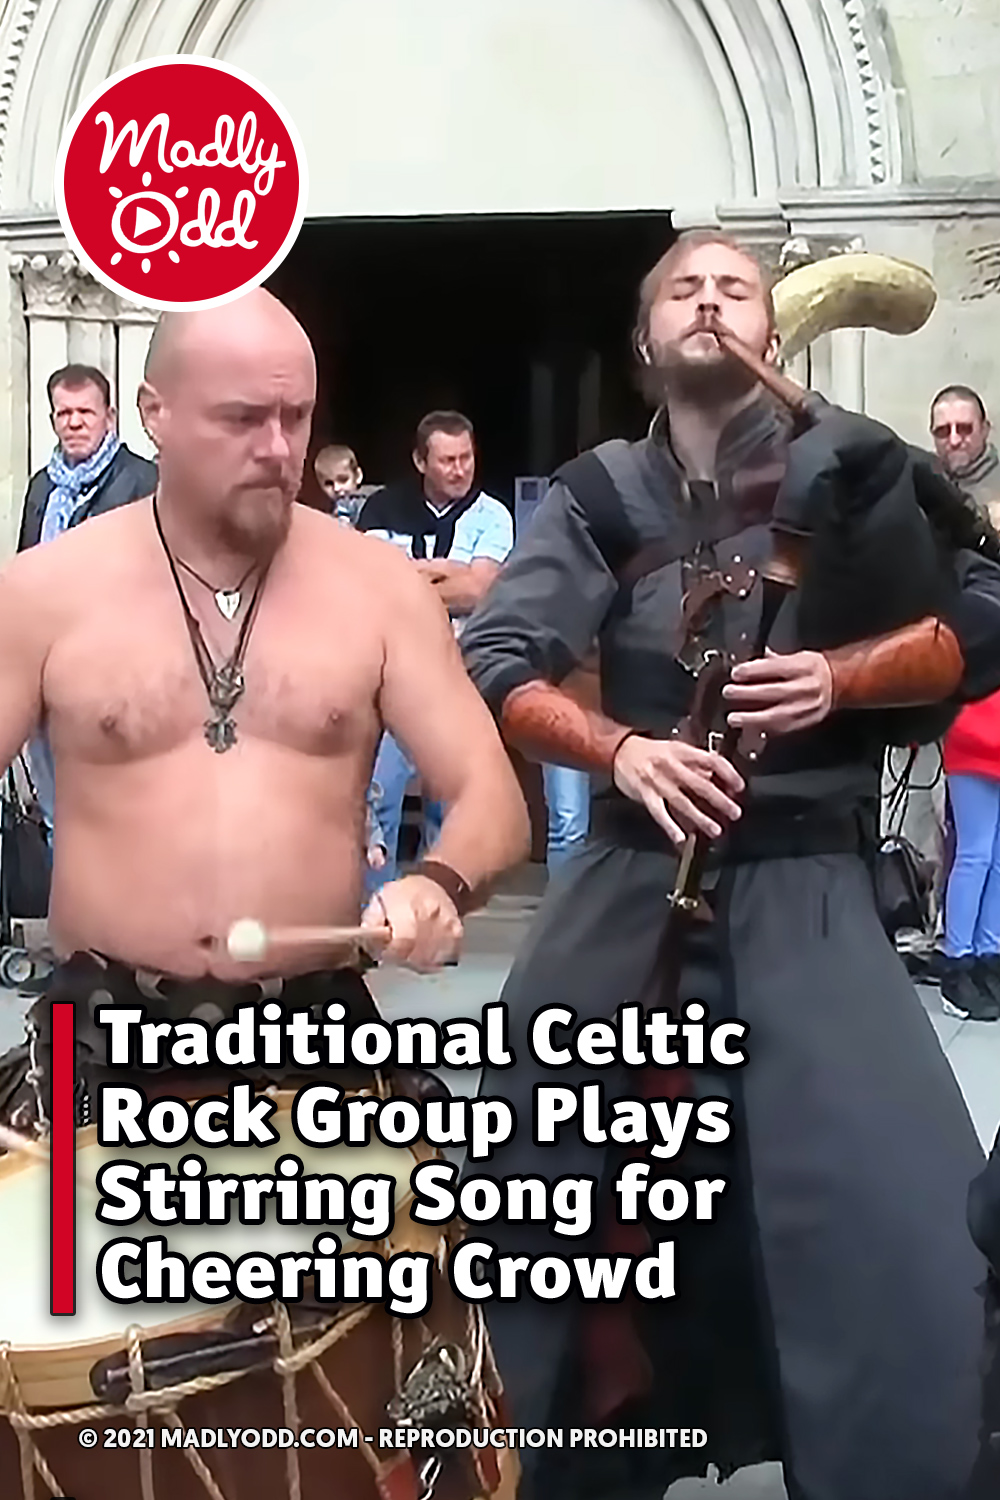 Traditional Celtic Rock Group Plays Stirring Song for Cheering Crowd